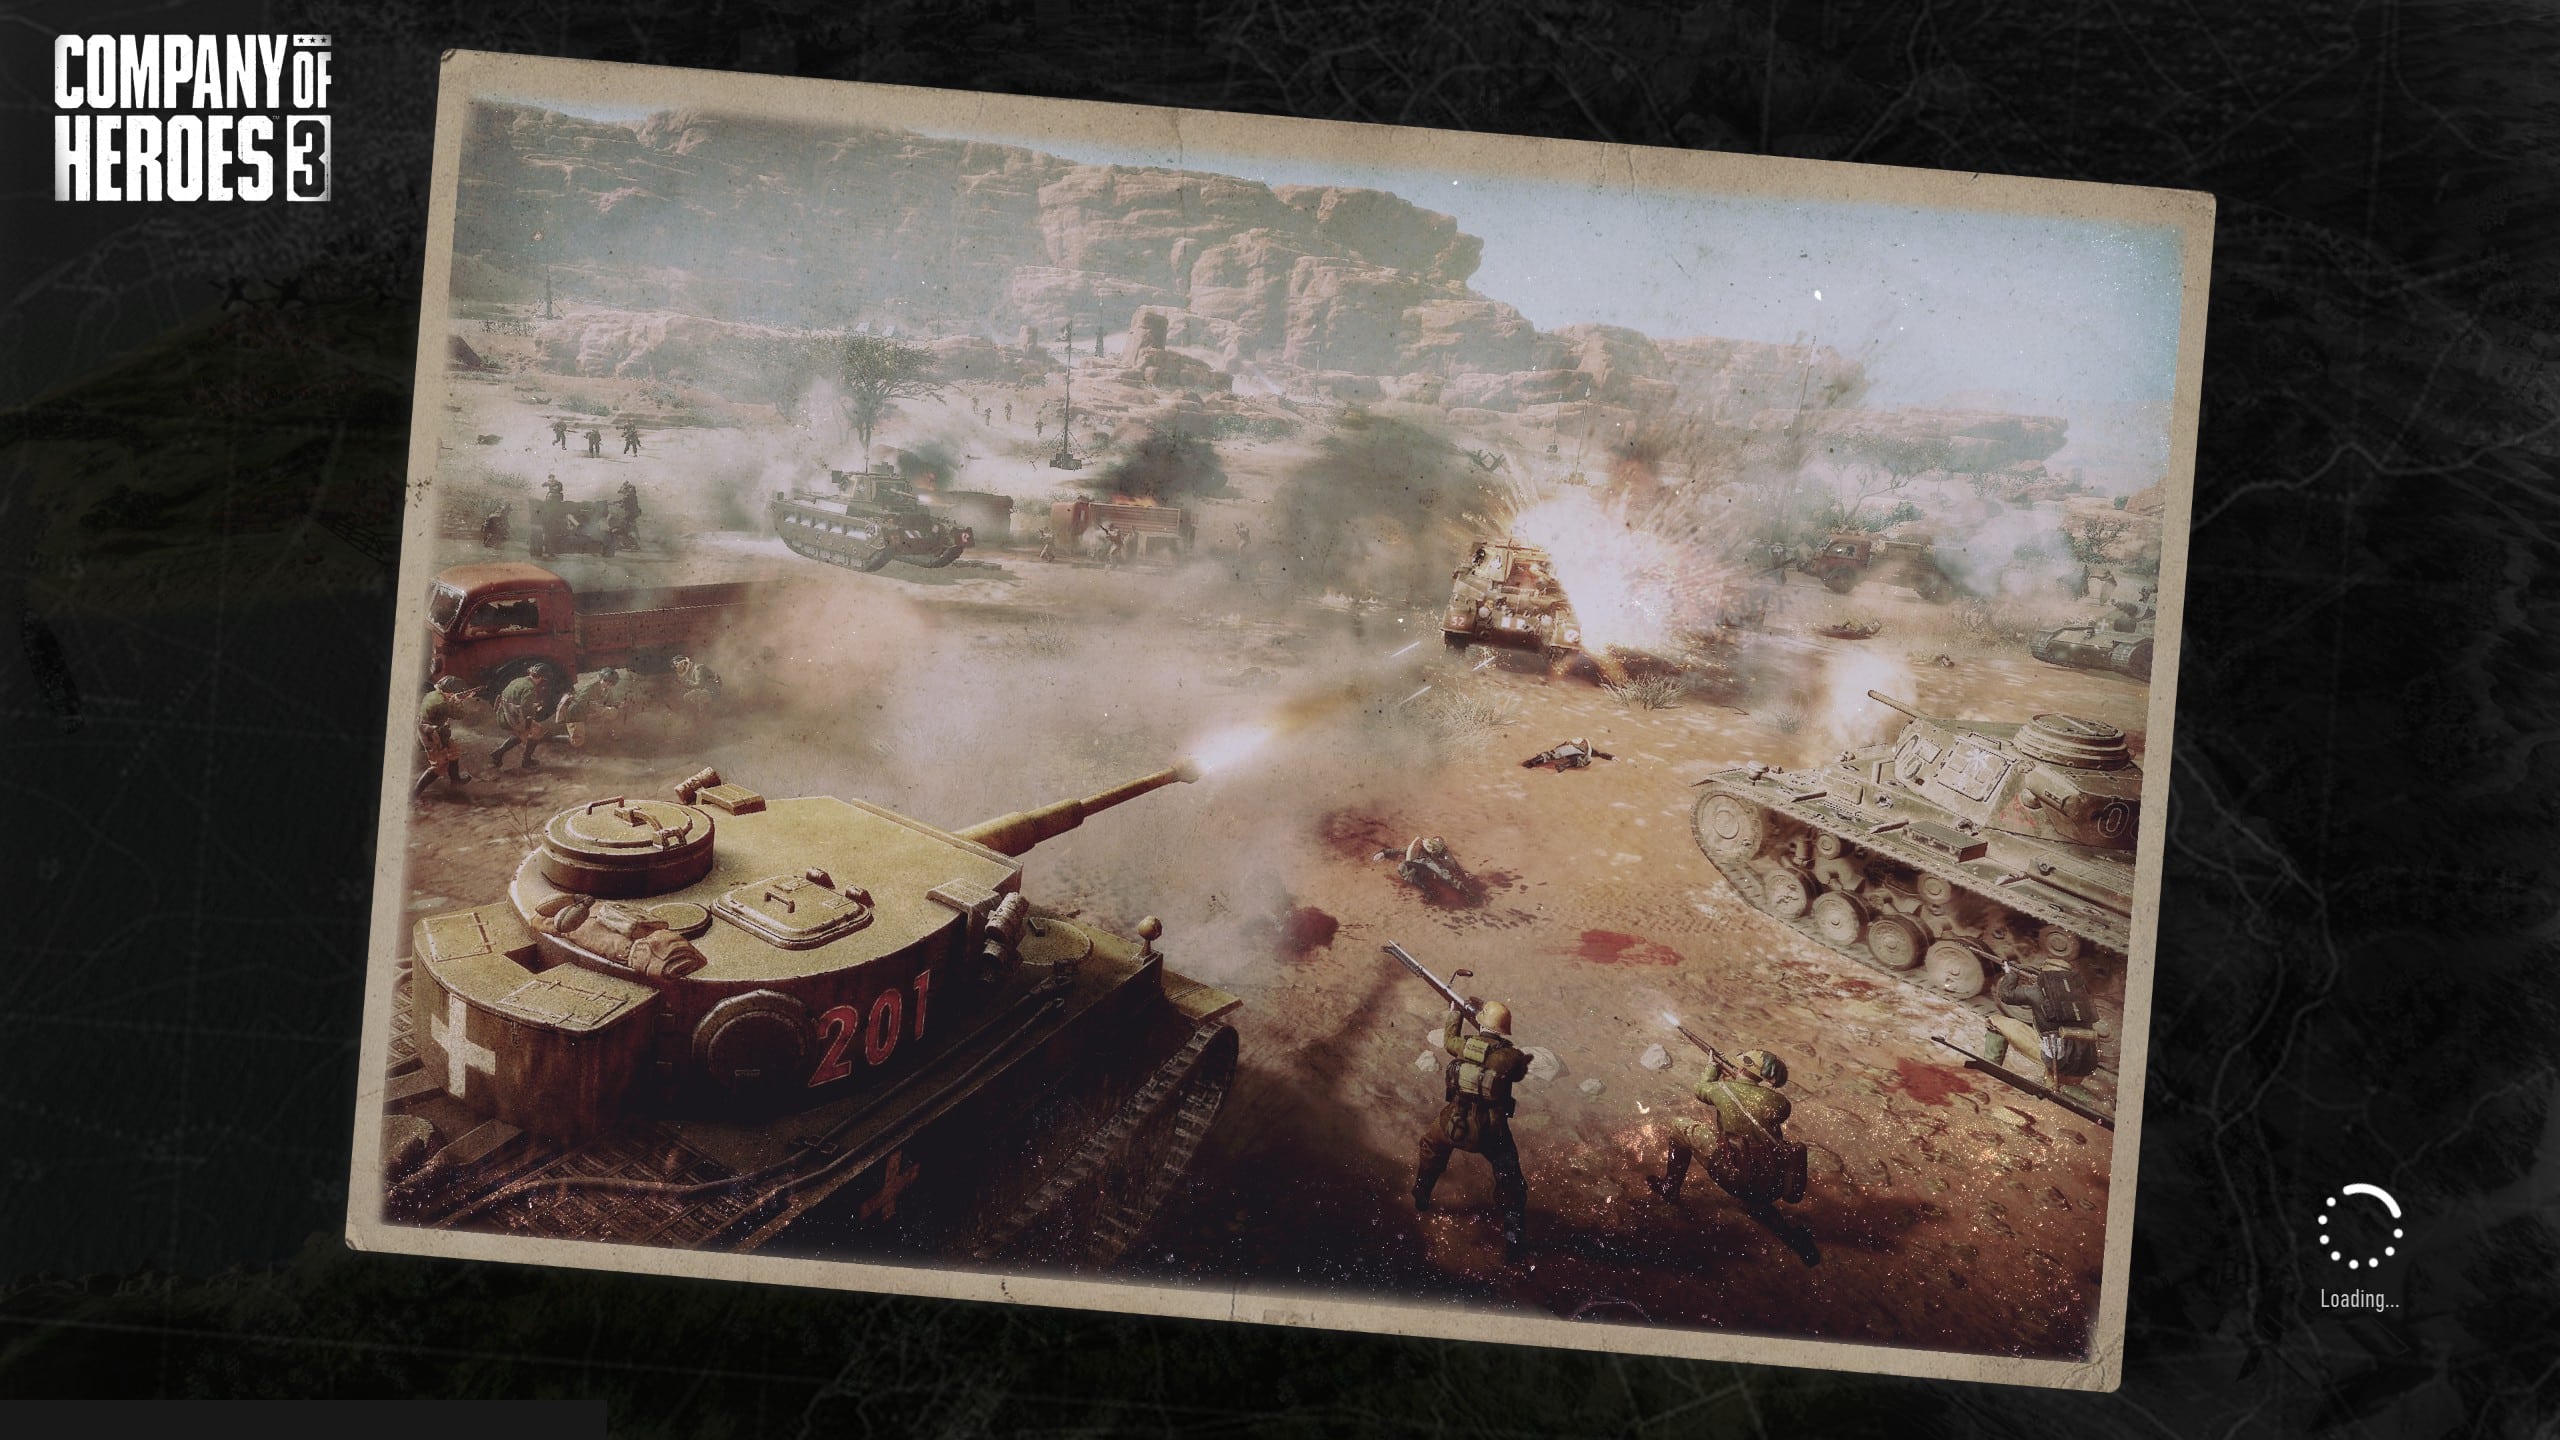 Company of Heroes 3 Hands On - Impressions GamersRD 13